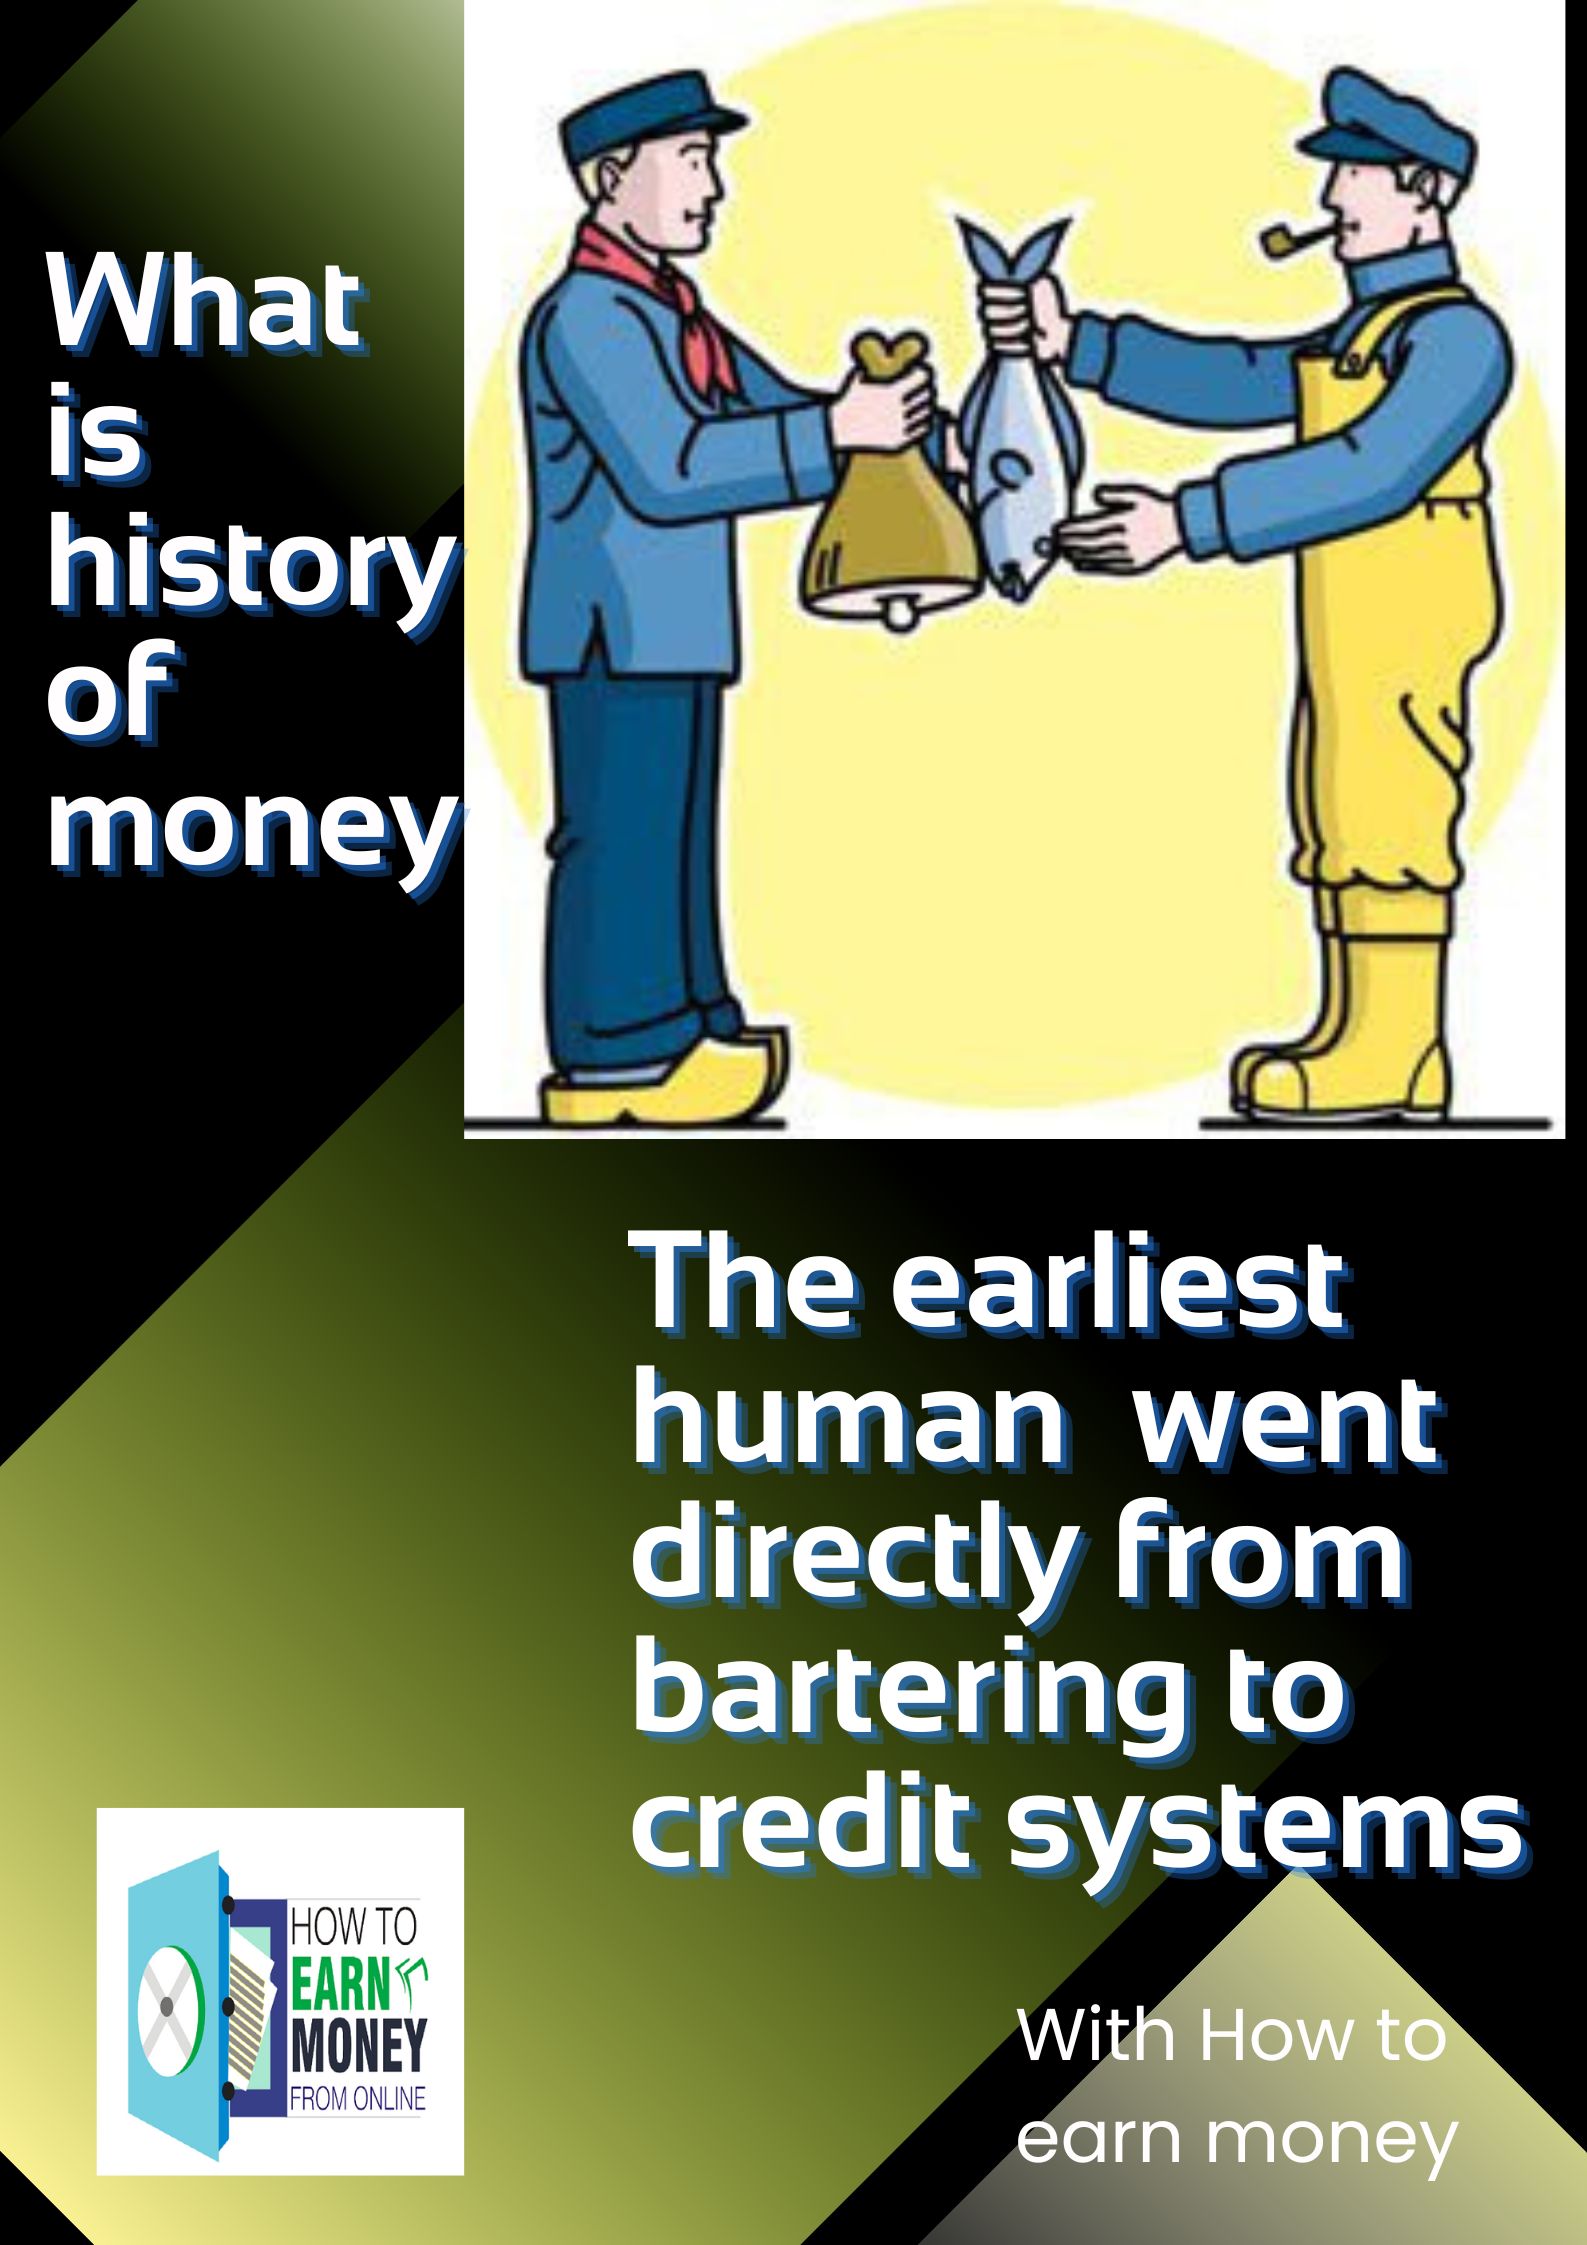 (What is history of money)